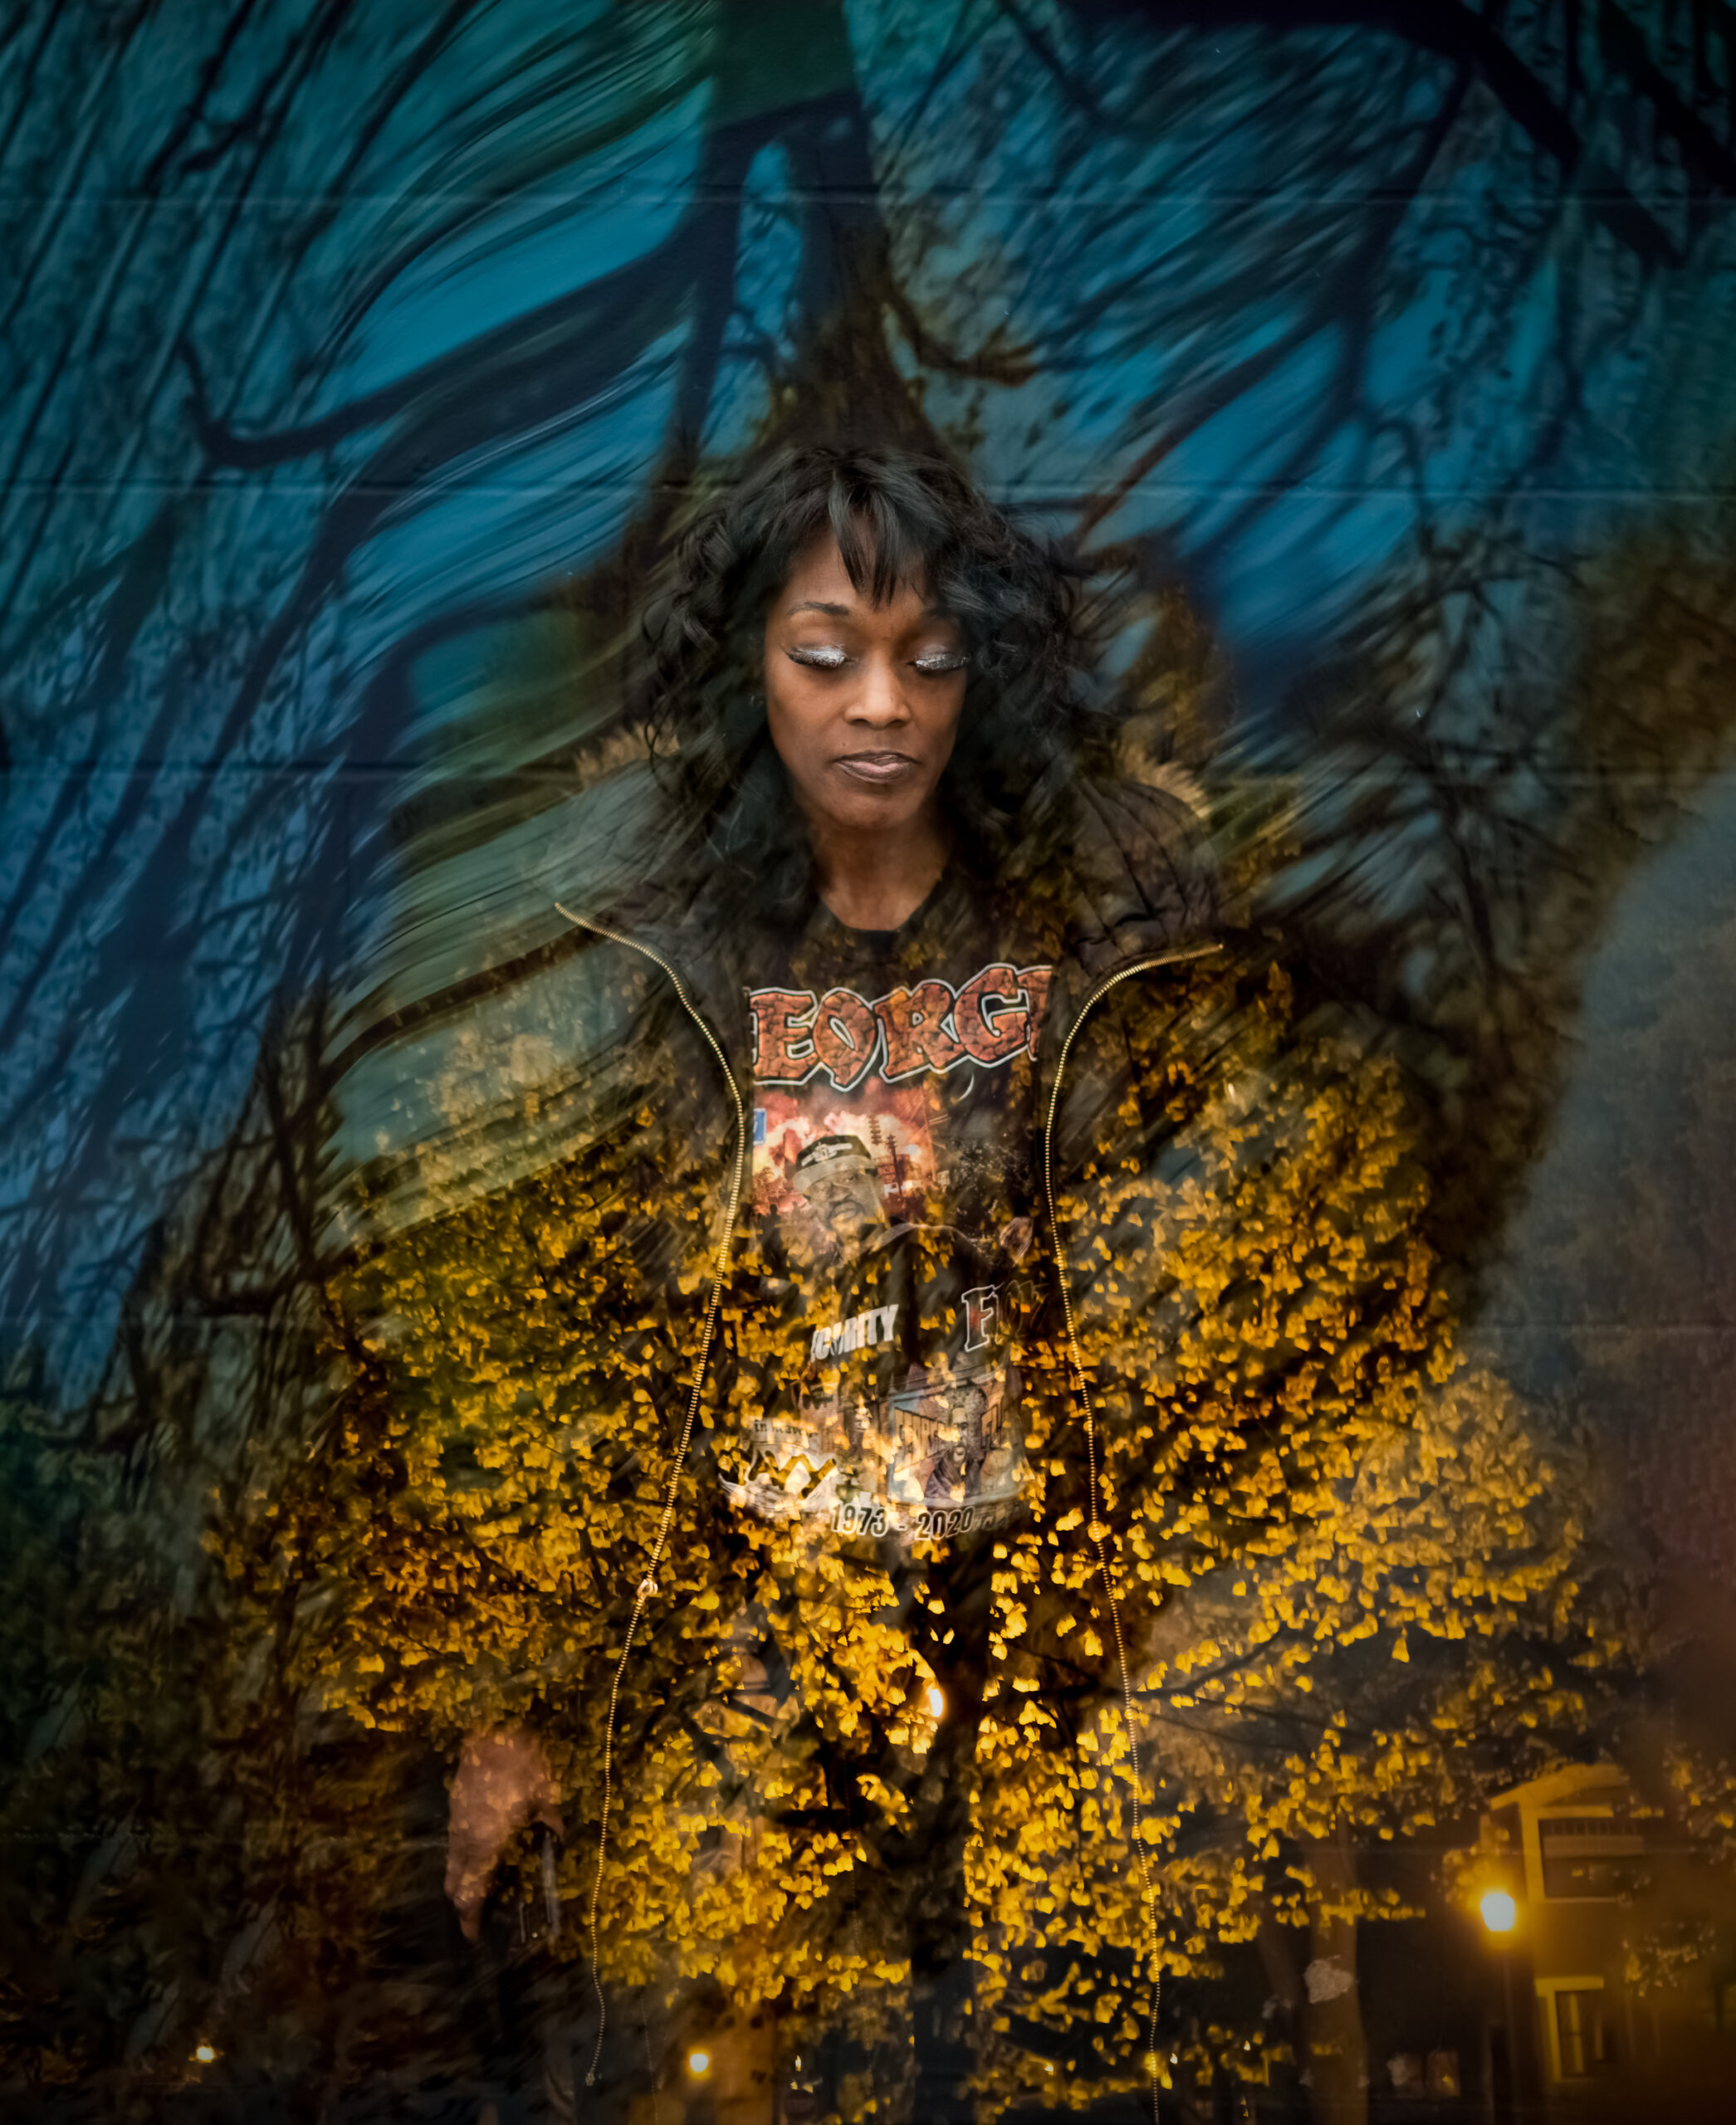 A multiple-exposure portrait of Shawanda Hill, a former girlfriend of George Floyd, in Minneapolis, MN on April 12, 2022. On May 25, 2020, Hill met Floyd at Cup Foods moments before his fatal encounter with former Minneapolis police officer Derek Chauvin. Blocked by a park officer, Hill was unable to see that Floyd was being suffocated under Chauvin’s knee, and left to care for her granddaughter. It wasn’t until the next day that she heard about his death on the morning news. She still mourns not doing more for him, but Hill also remembers Floyd for the ways he loved and held her up her during their time together. She says, “He let me cry, he let me snap. He was there for me.”